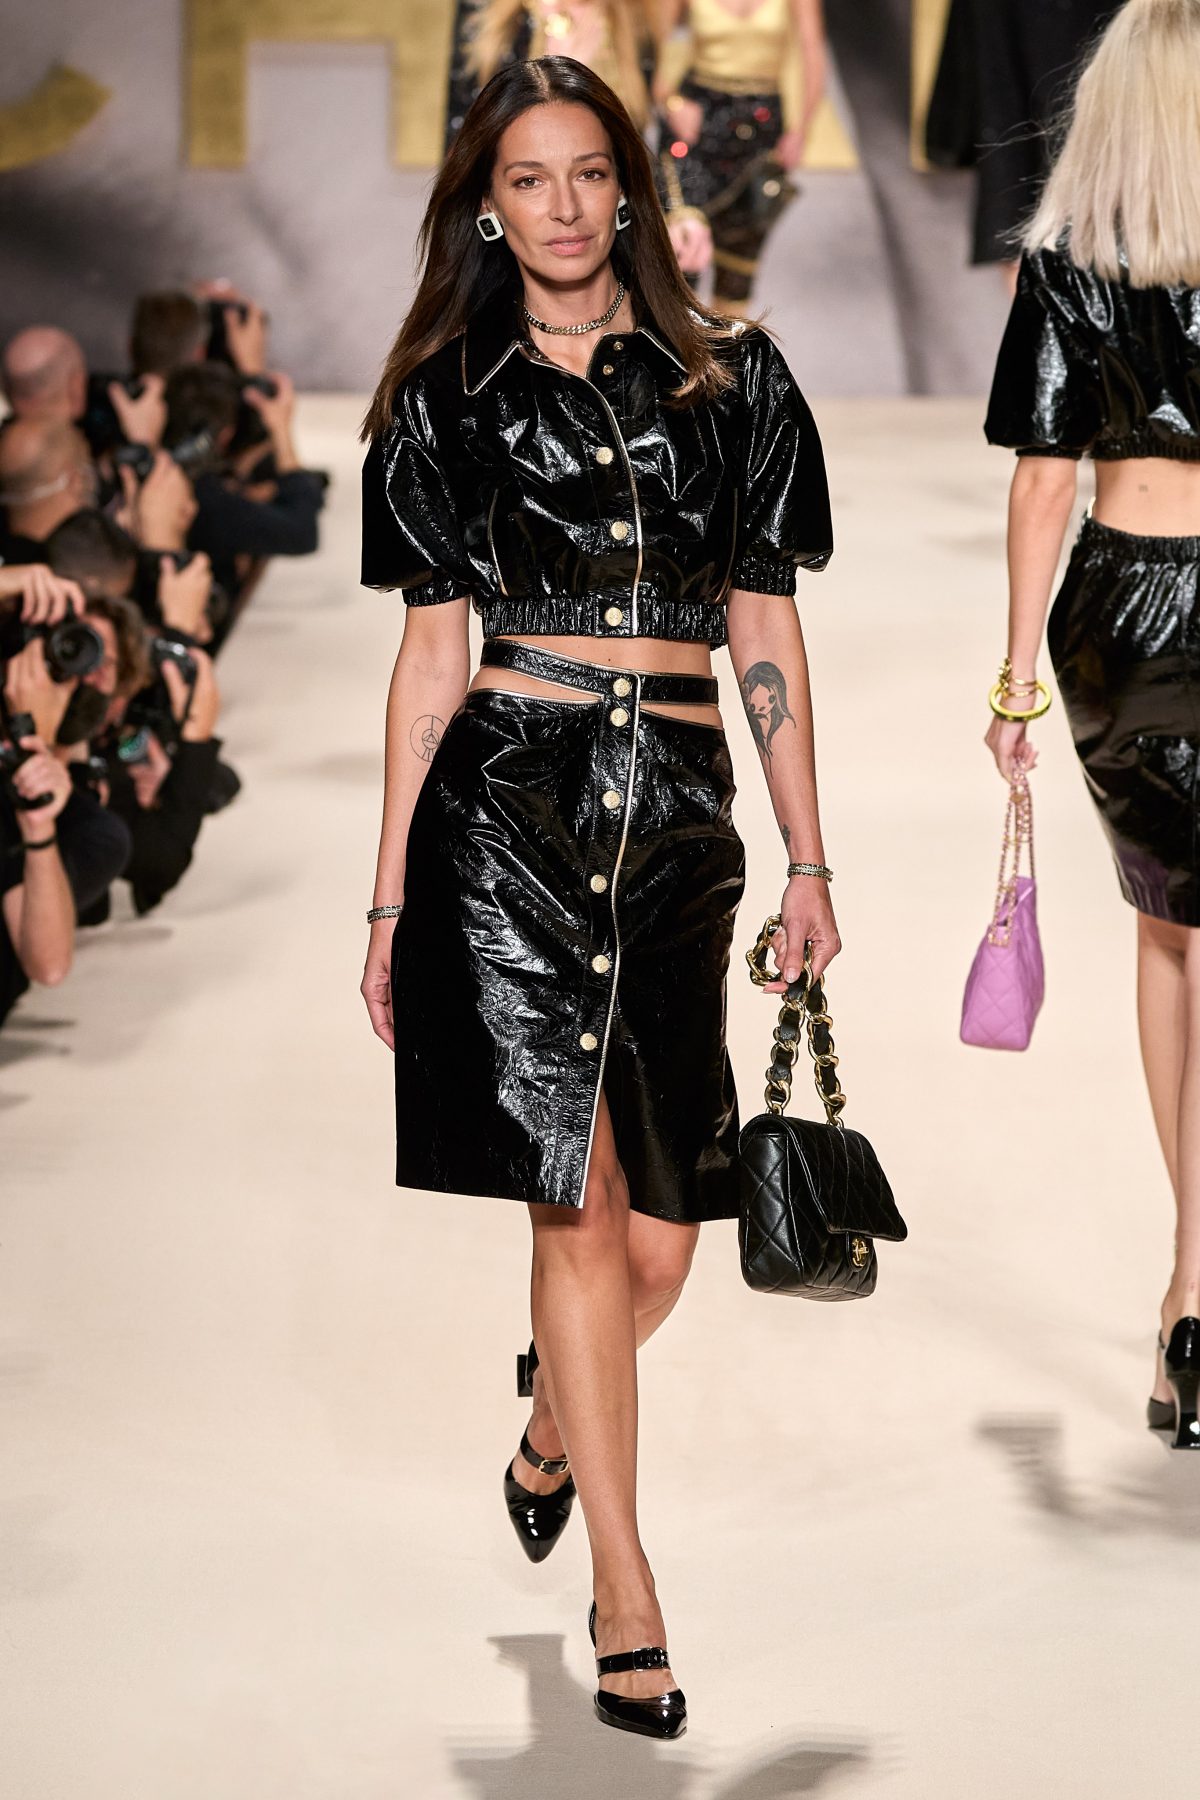 Chanel Brings Back The '80s Fashion Runway For Spring 2022